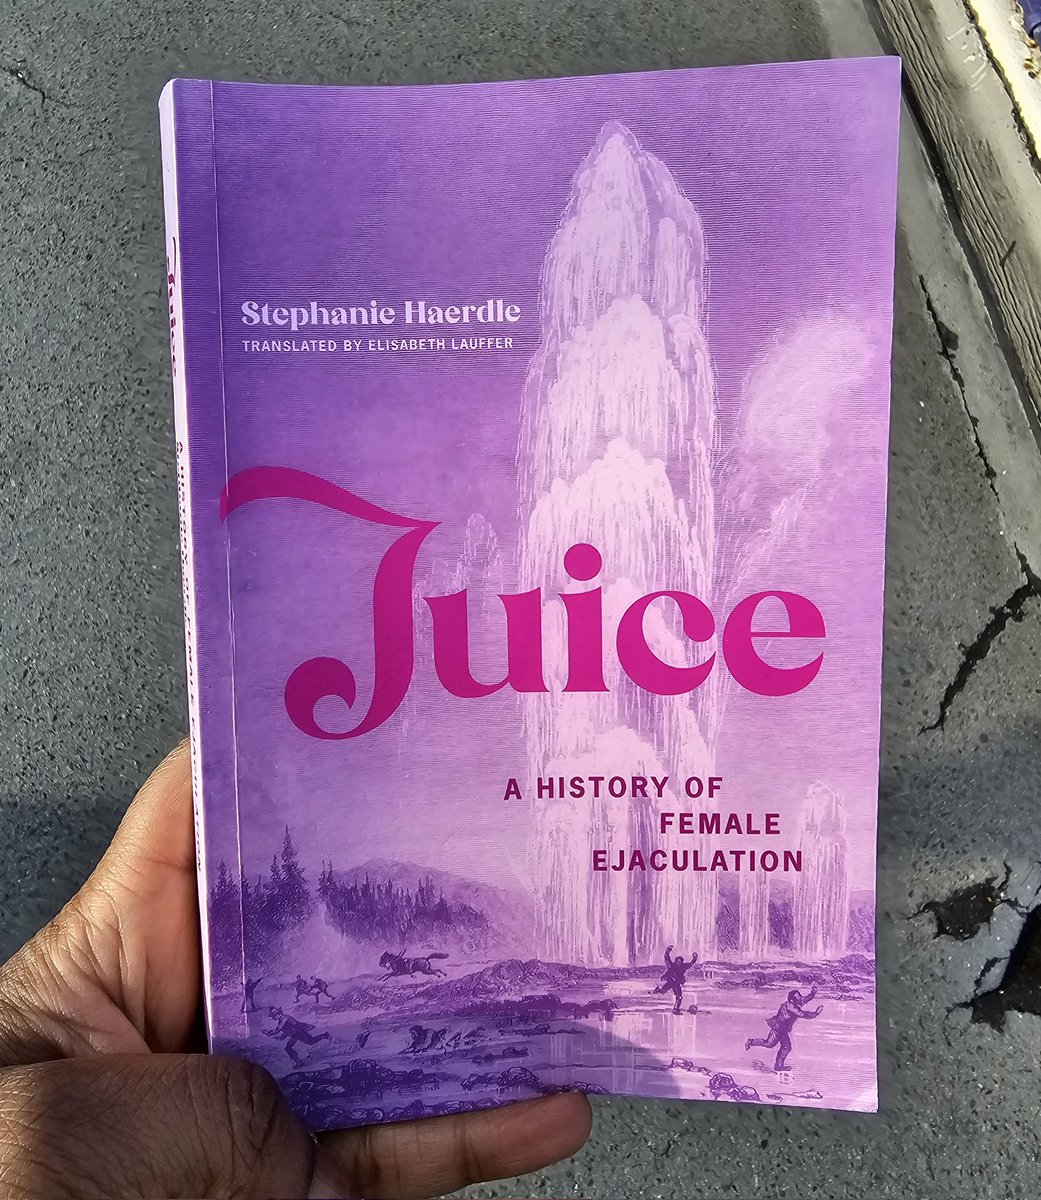 REVIEW: Juice: A History of Female Ejaculation by Stephanie Haerdle offers a fascinating and well-researched account of a taboo topic. It traces the cultural history of the female gush emitted during sexual pleasure. The book examines the different cultural attitudes towards